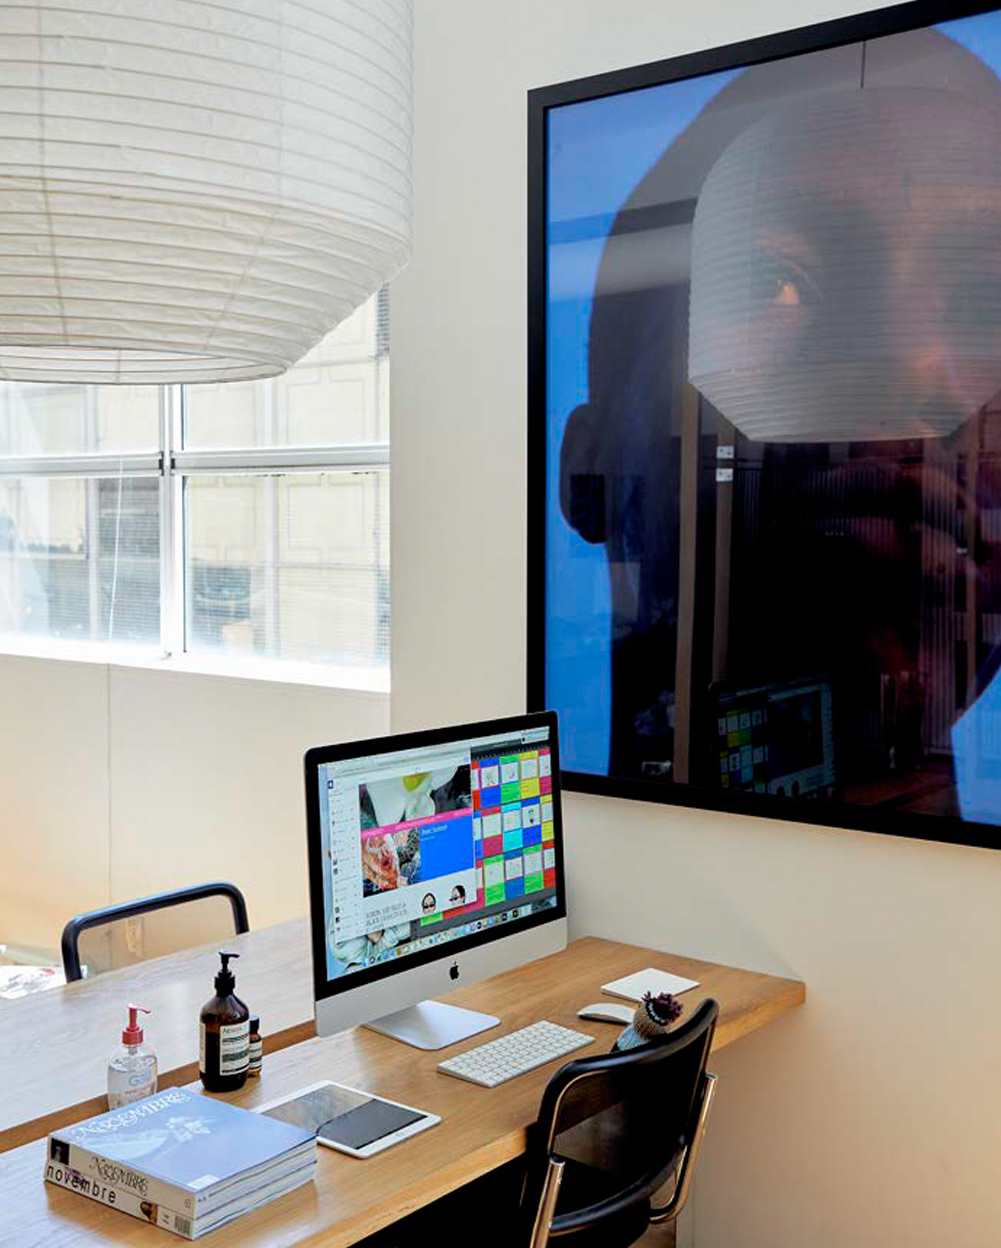 Office space with desk, mac computer, chairs and large portrait photo on wall.